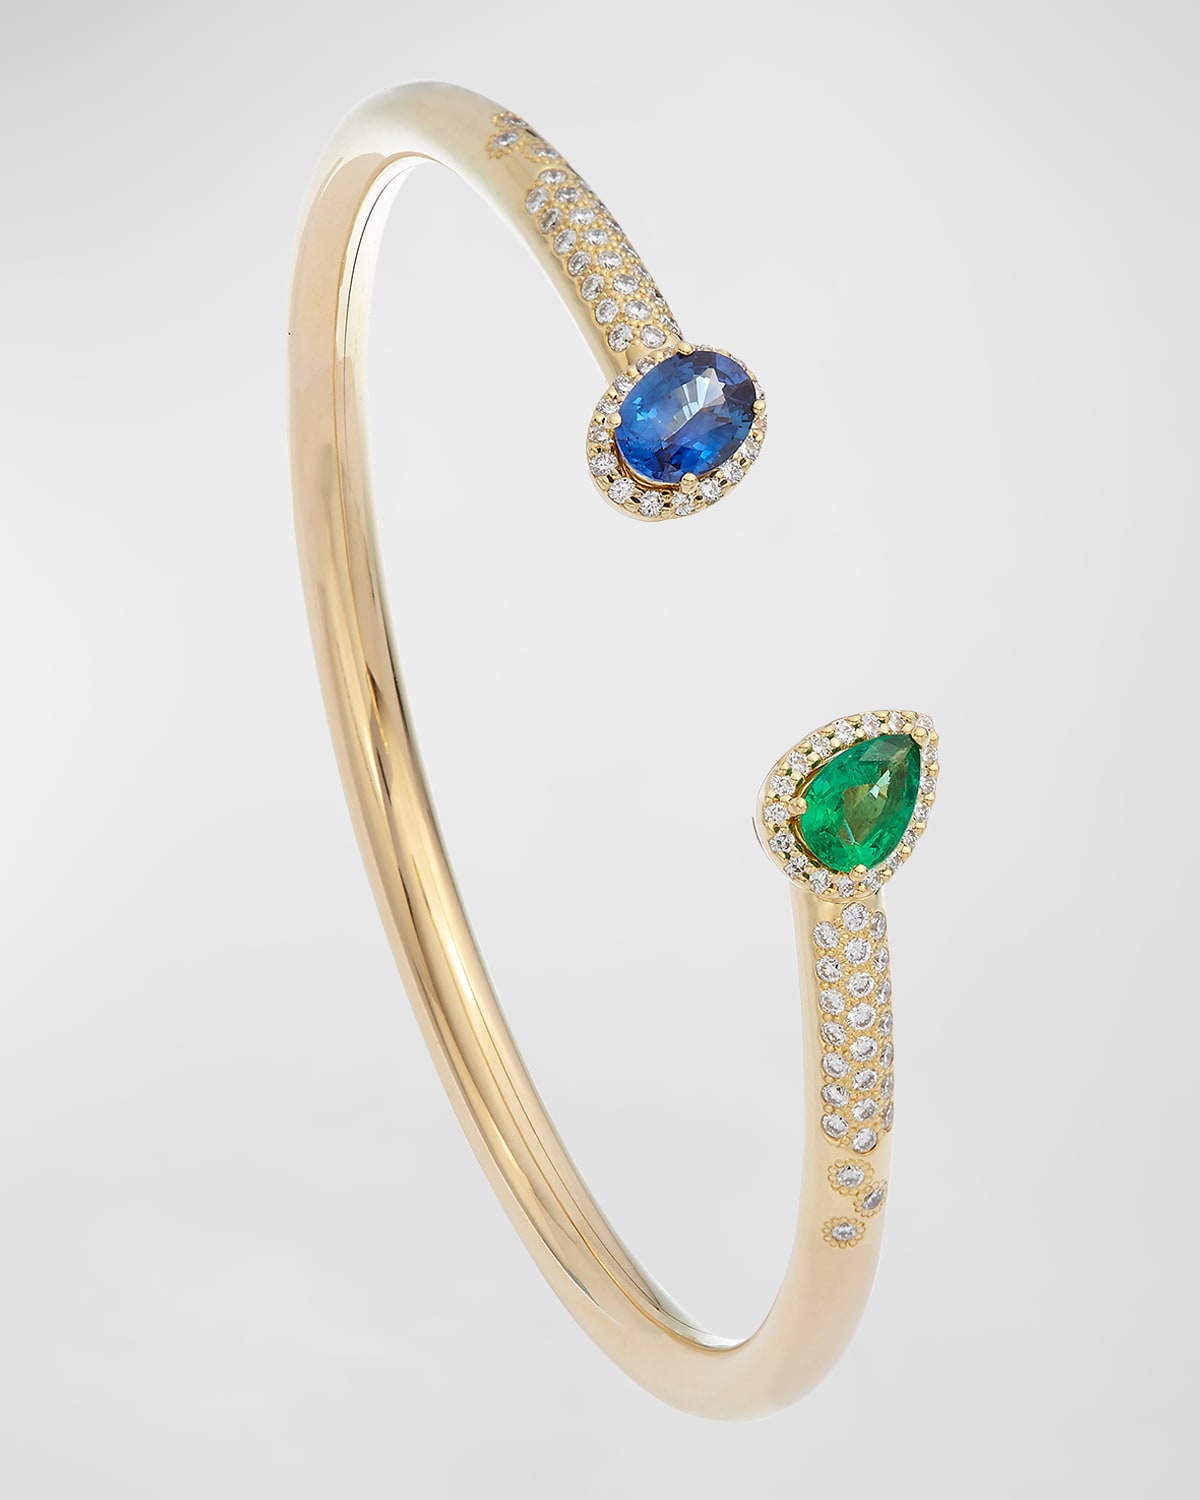 Krisonia 18k Yellow Gold Cuff Bracelet With Sapphires And Diamonds